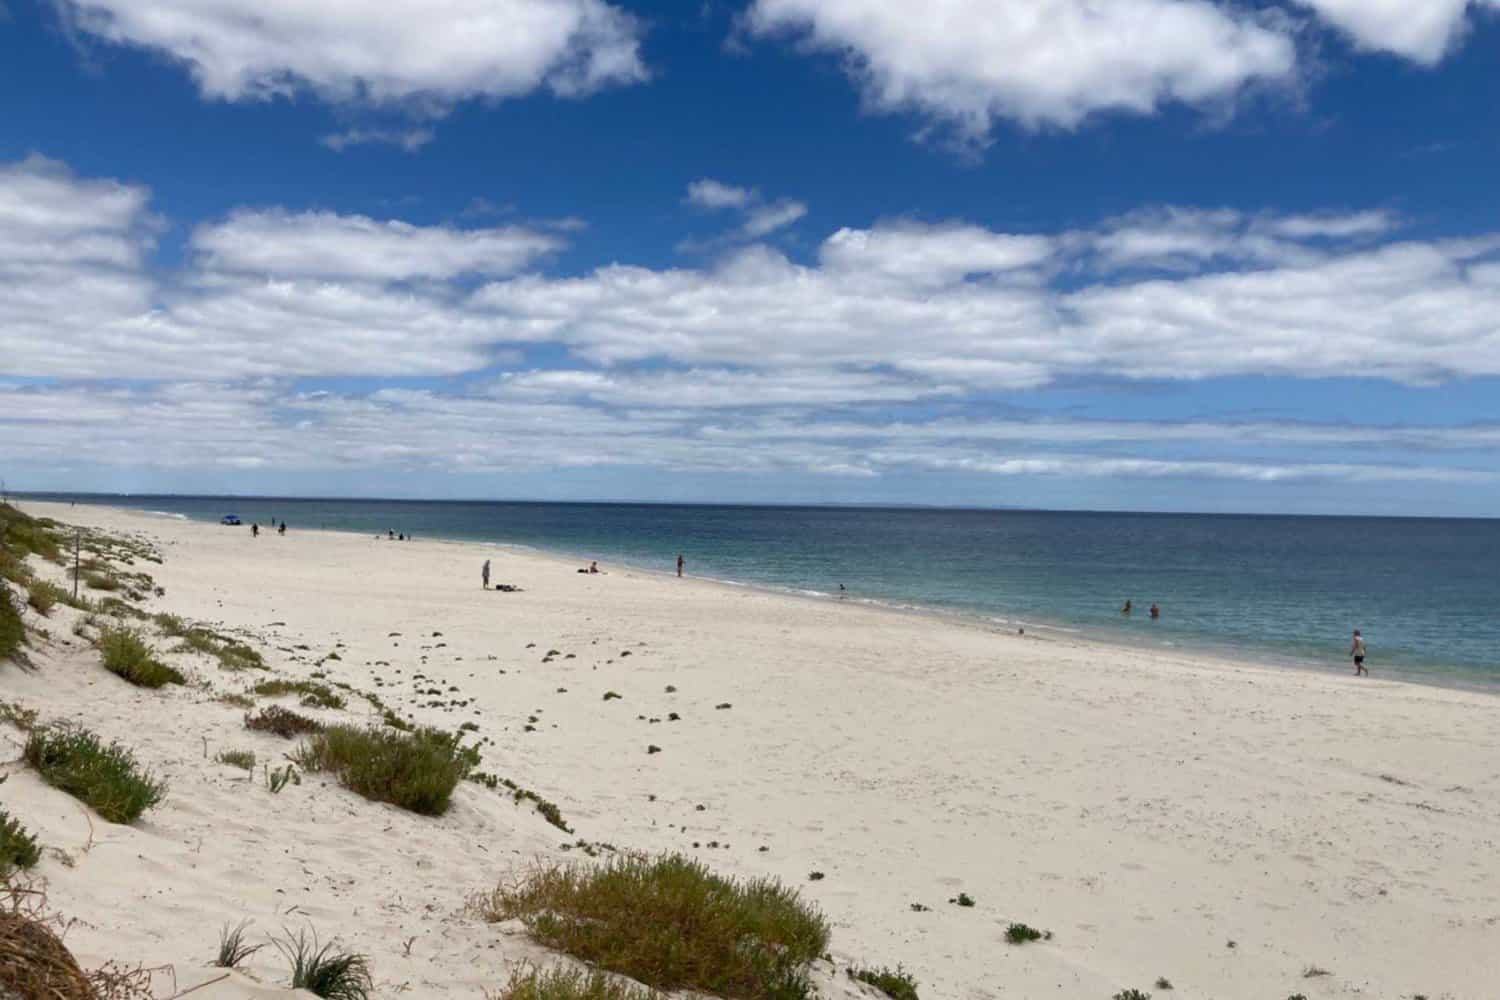 Overcast summer view of Peppermint Grove Beach, with calm grey skies meeting the serene waters, and the sandy shore gently curving into the distance, one of the popular Margaret River beaches on offer.